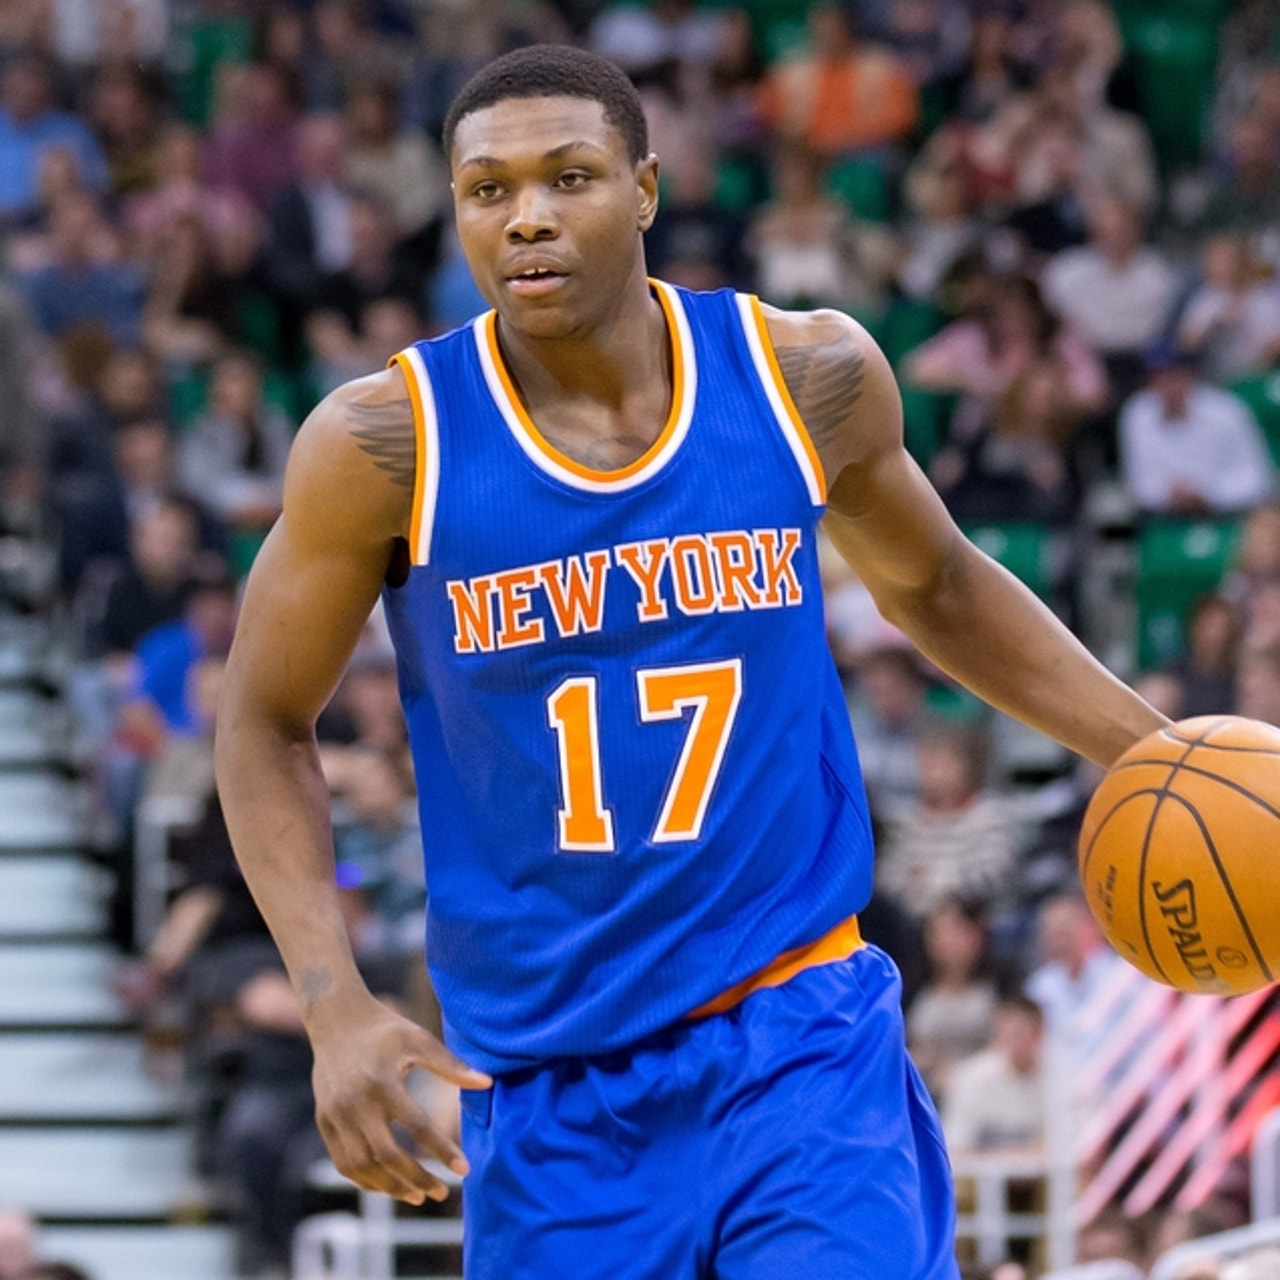 Knicks sign second-round pick Cleanthony Early